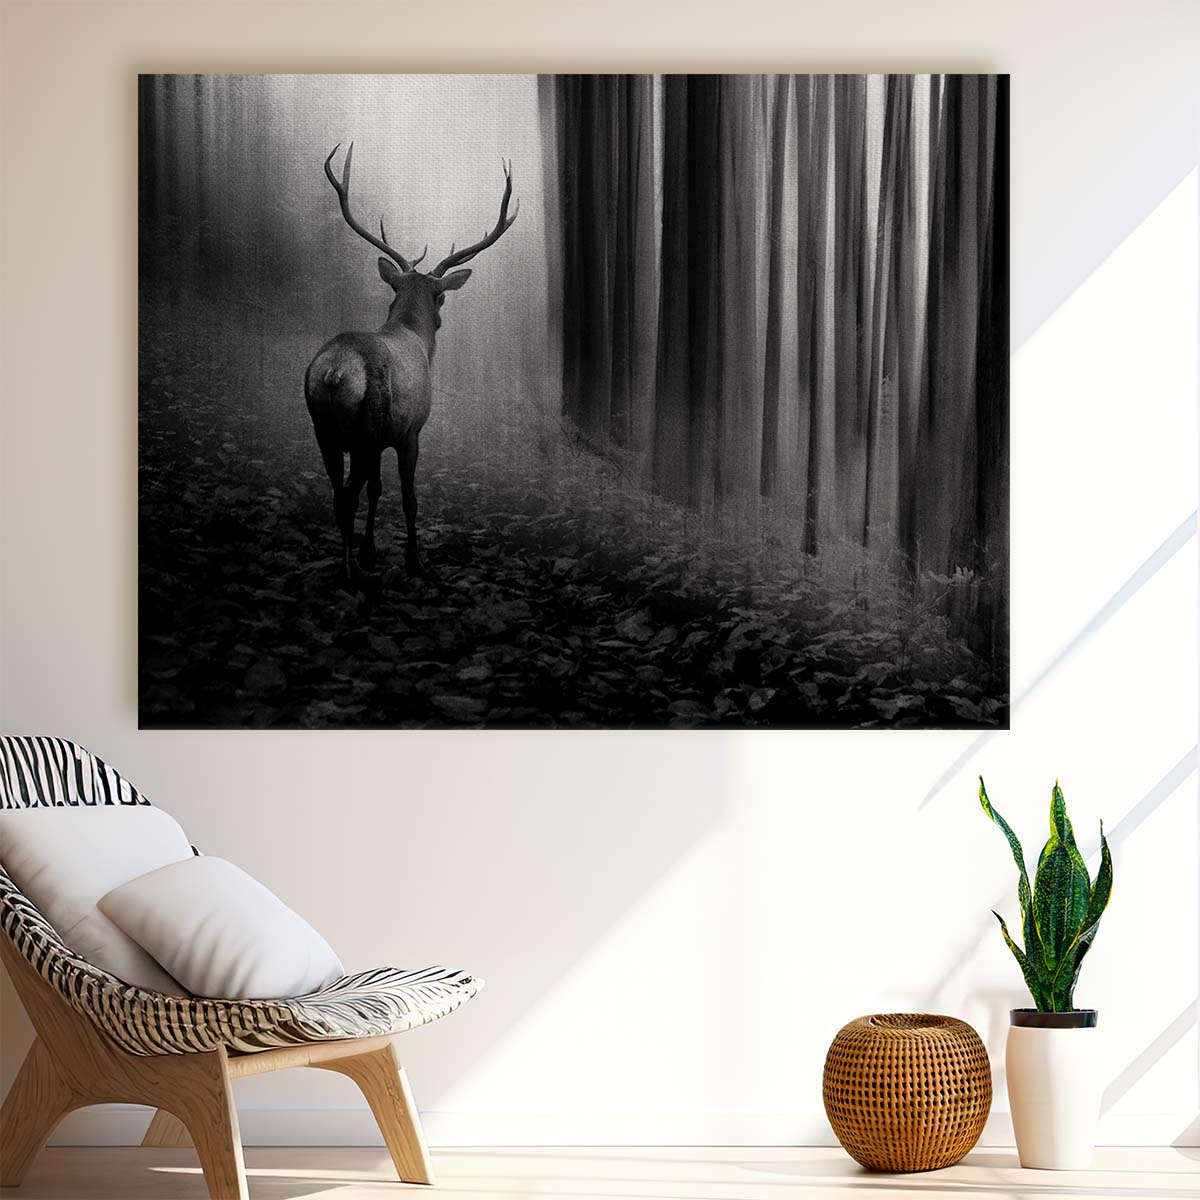 Majestic Stag in Monochrome Forest Landscape Wall Art by Luxuriance Designs. Made in USA.